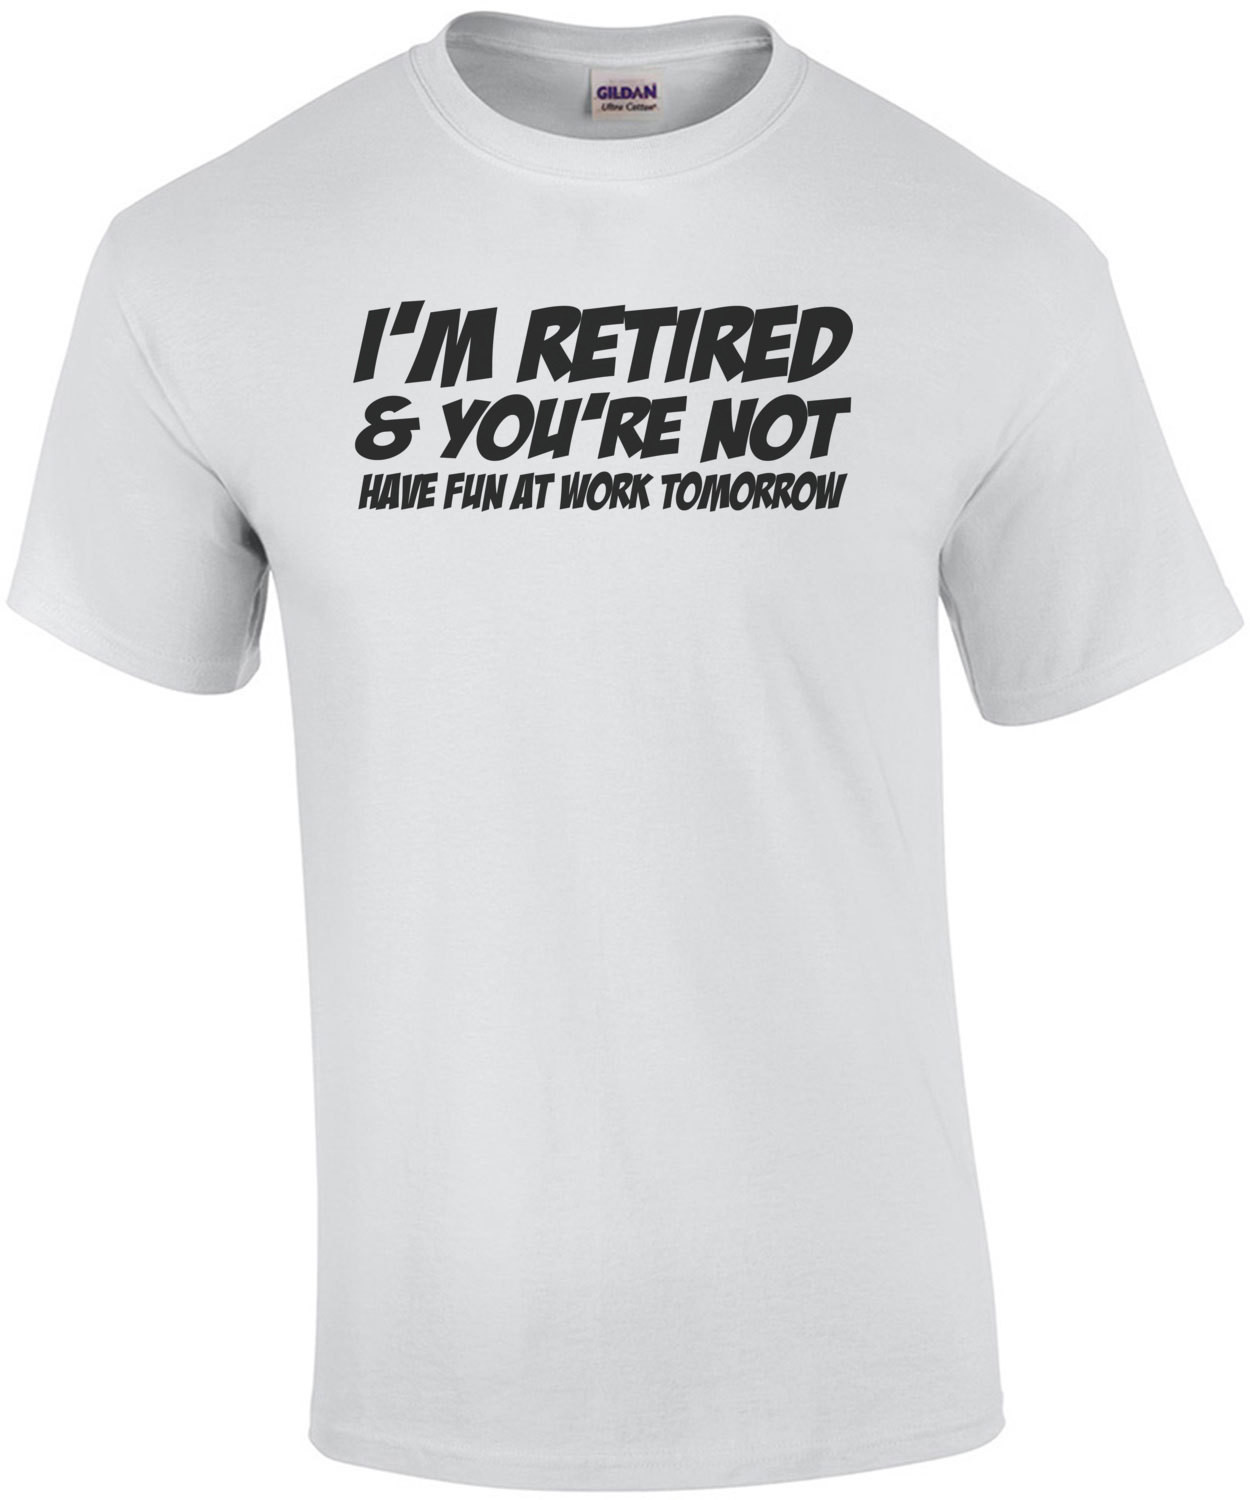 I'm Retired And You're Not Have Fun At Work Tomorrow T-Shirt